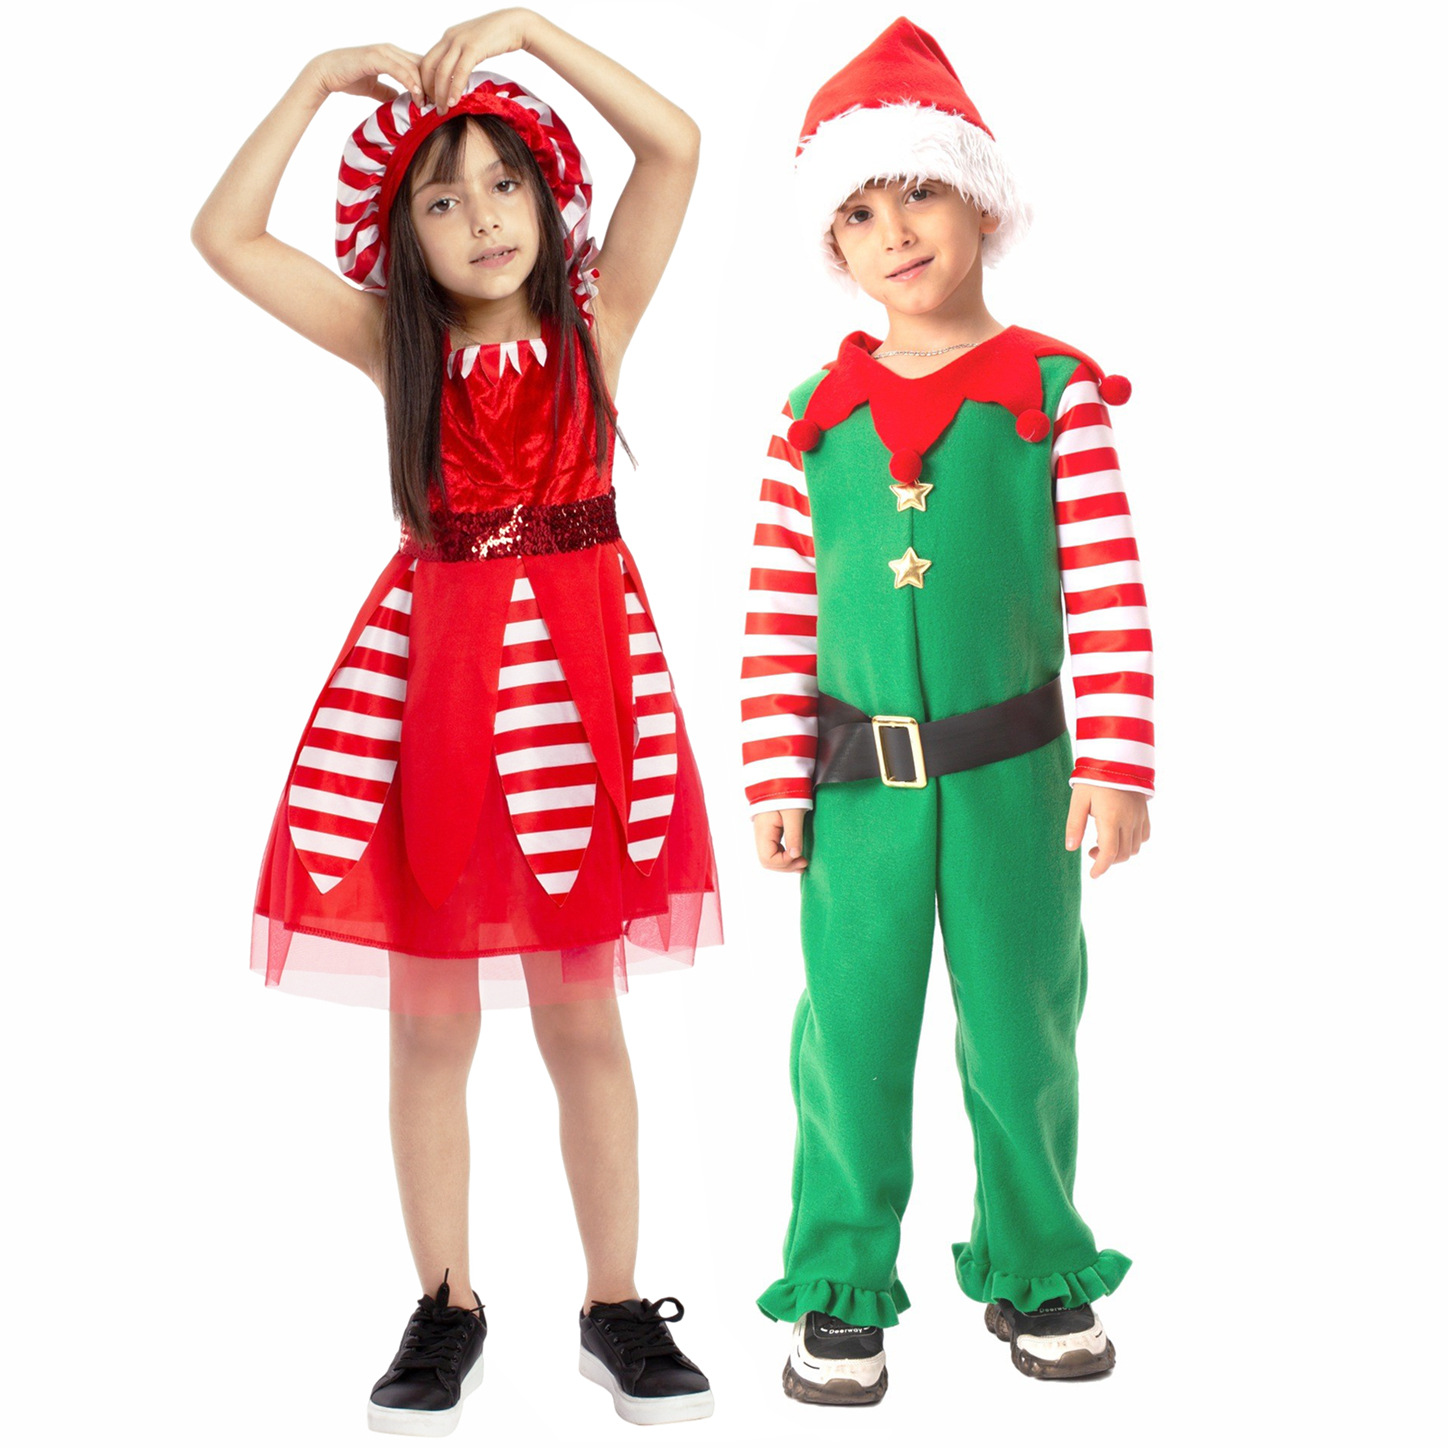 Children's Christmas costumes to serve Christmas small genre lovers' Festive Party Stage Show Costumes-Taobao